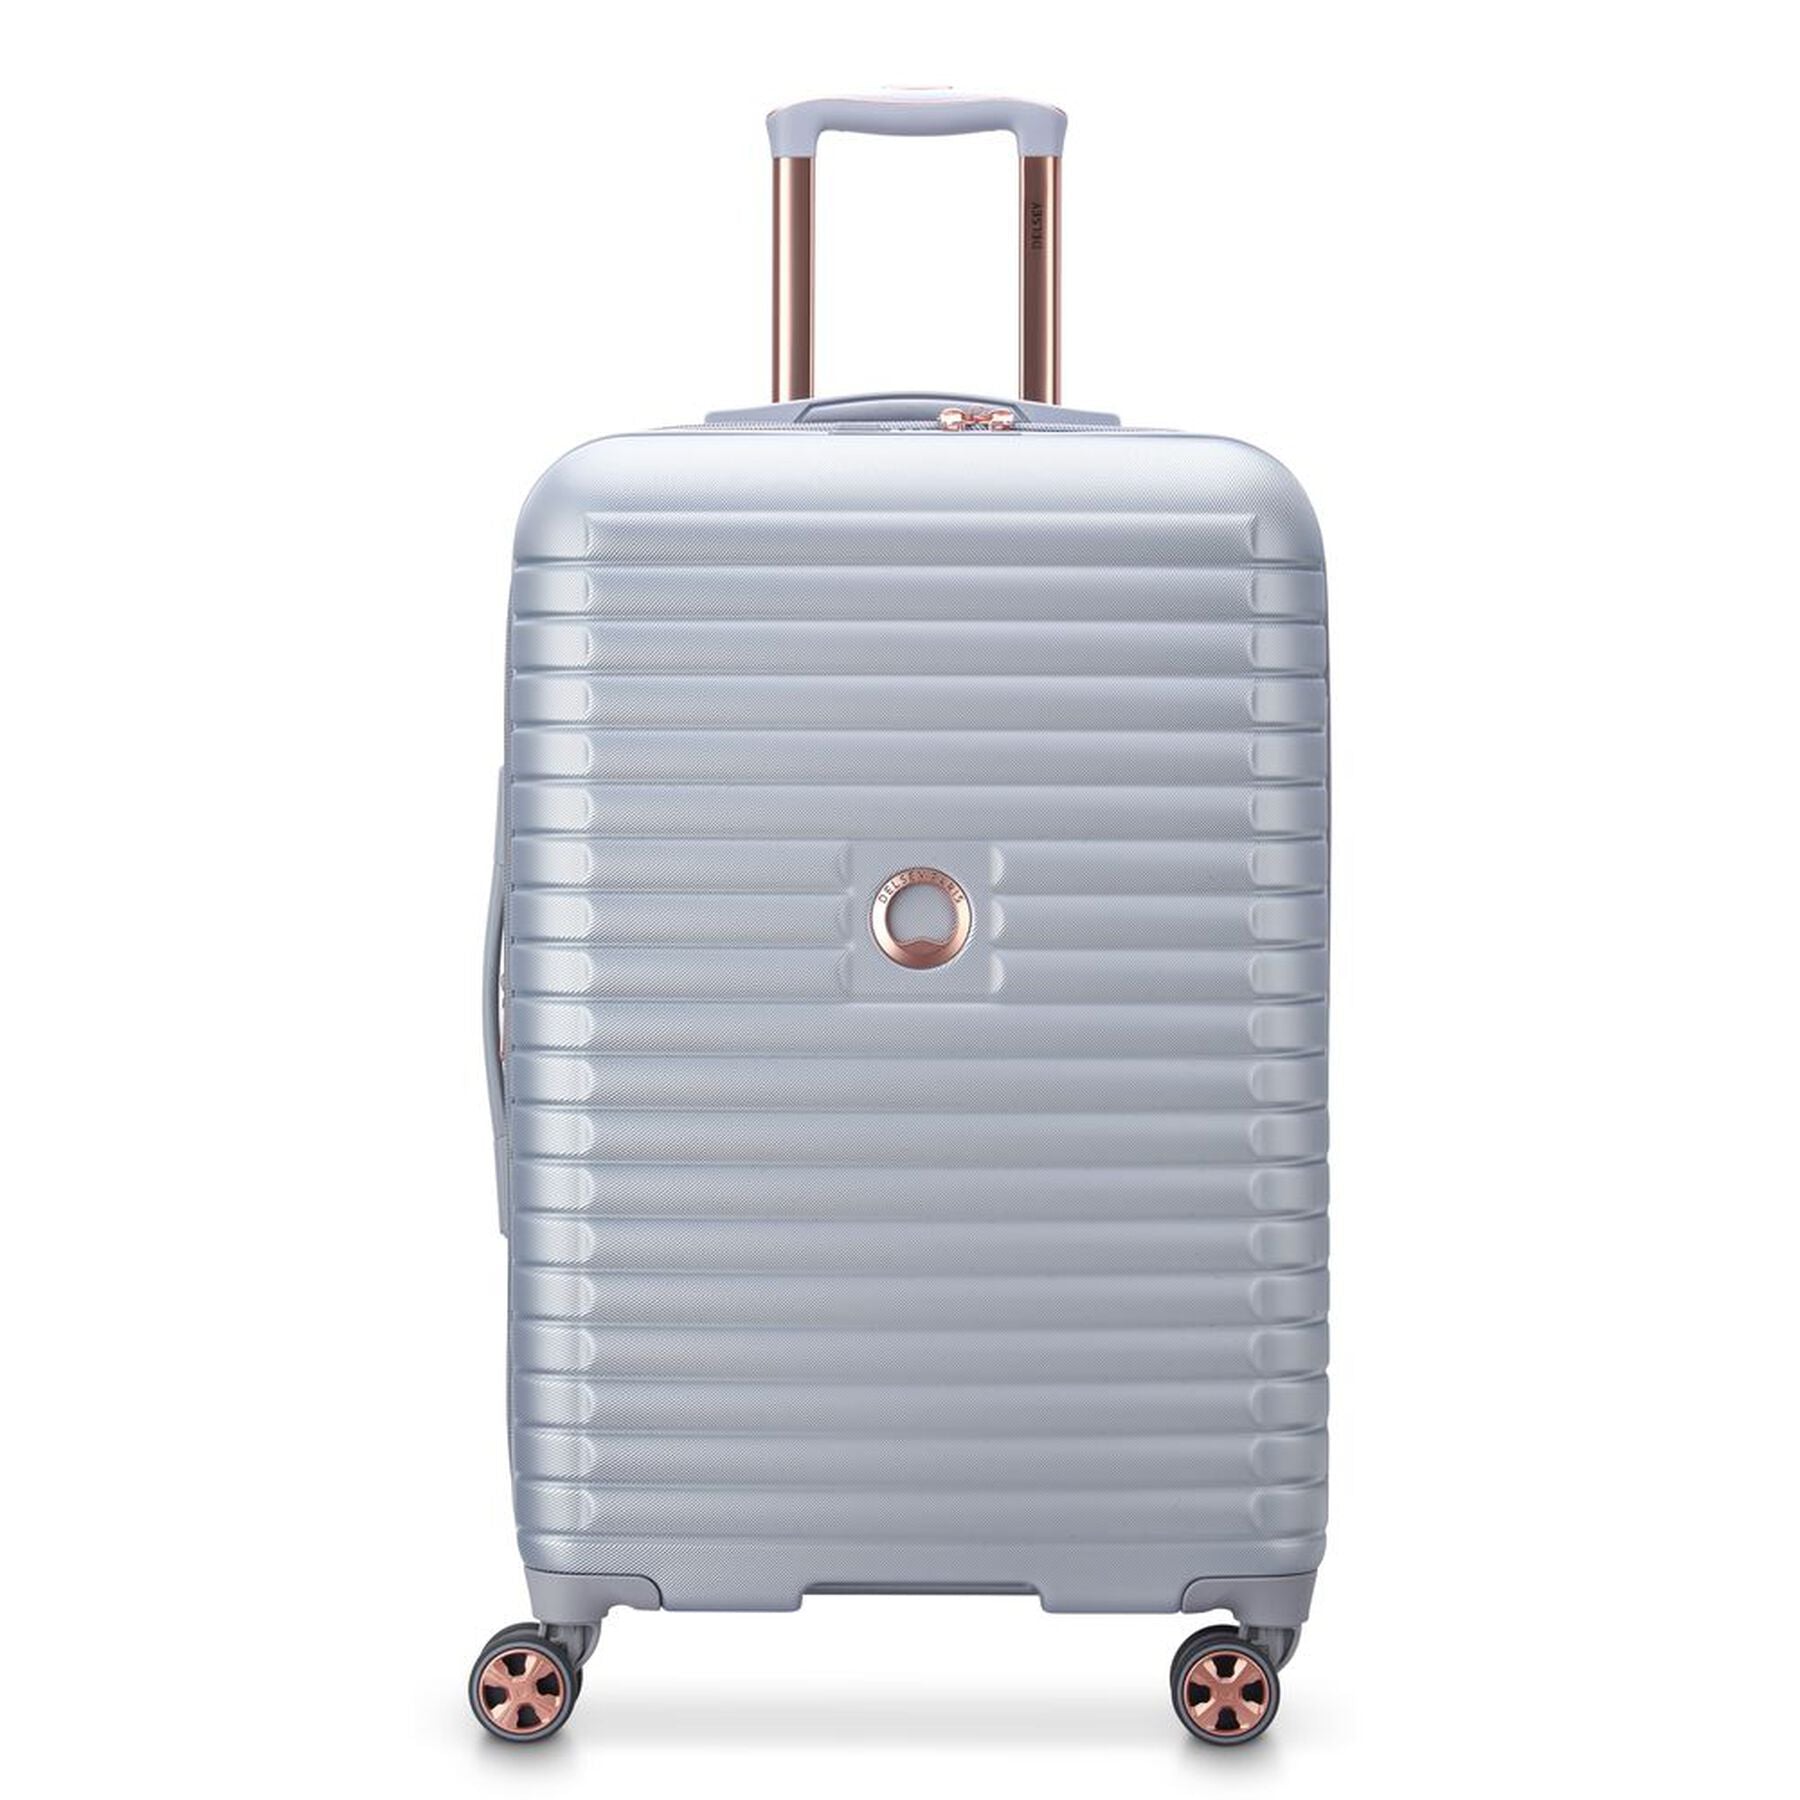 Delsey Cruise 3.0 24" Expandable Spinner Upright